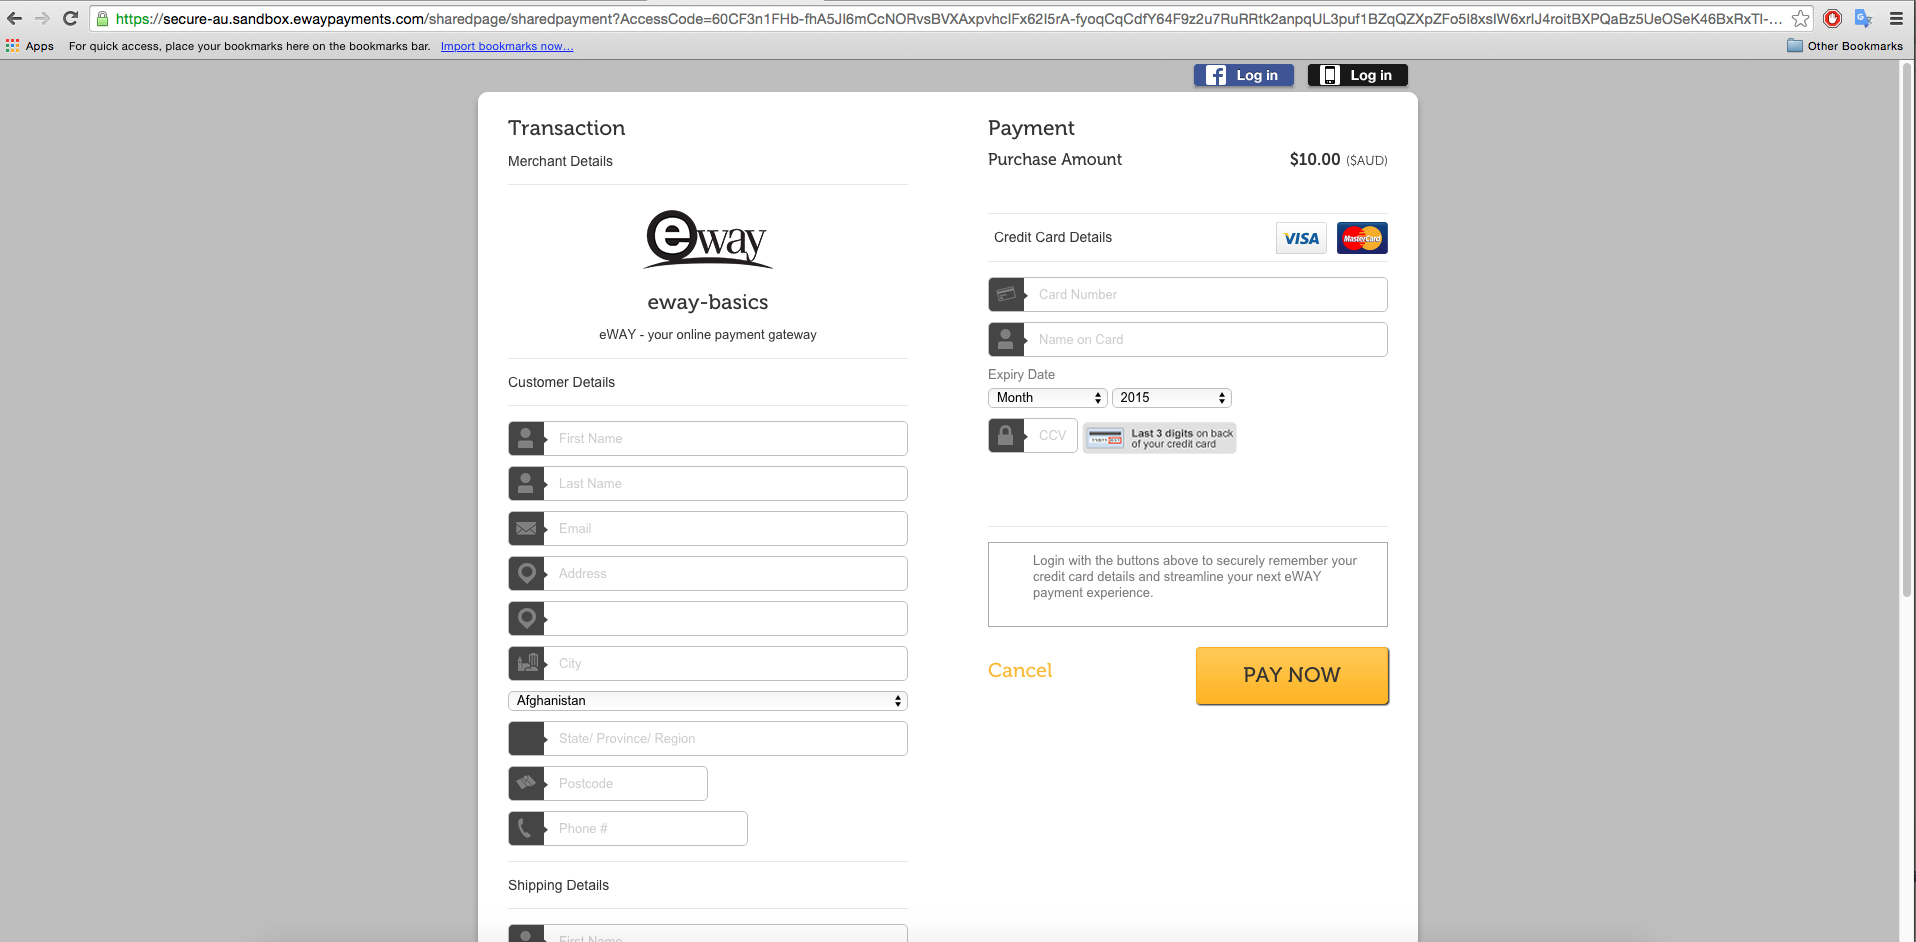 eWay: Payment page for the transaction